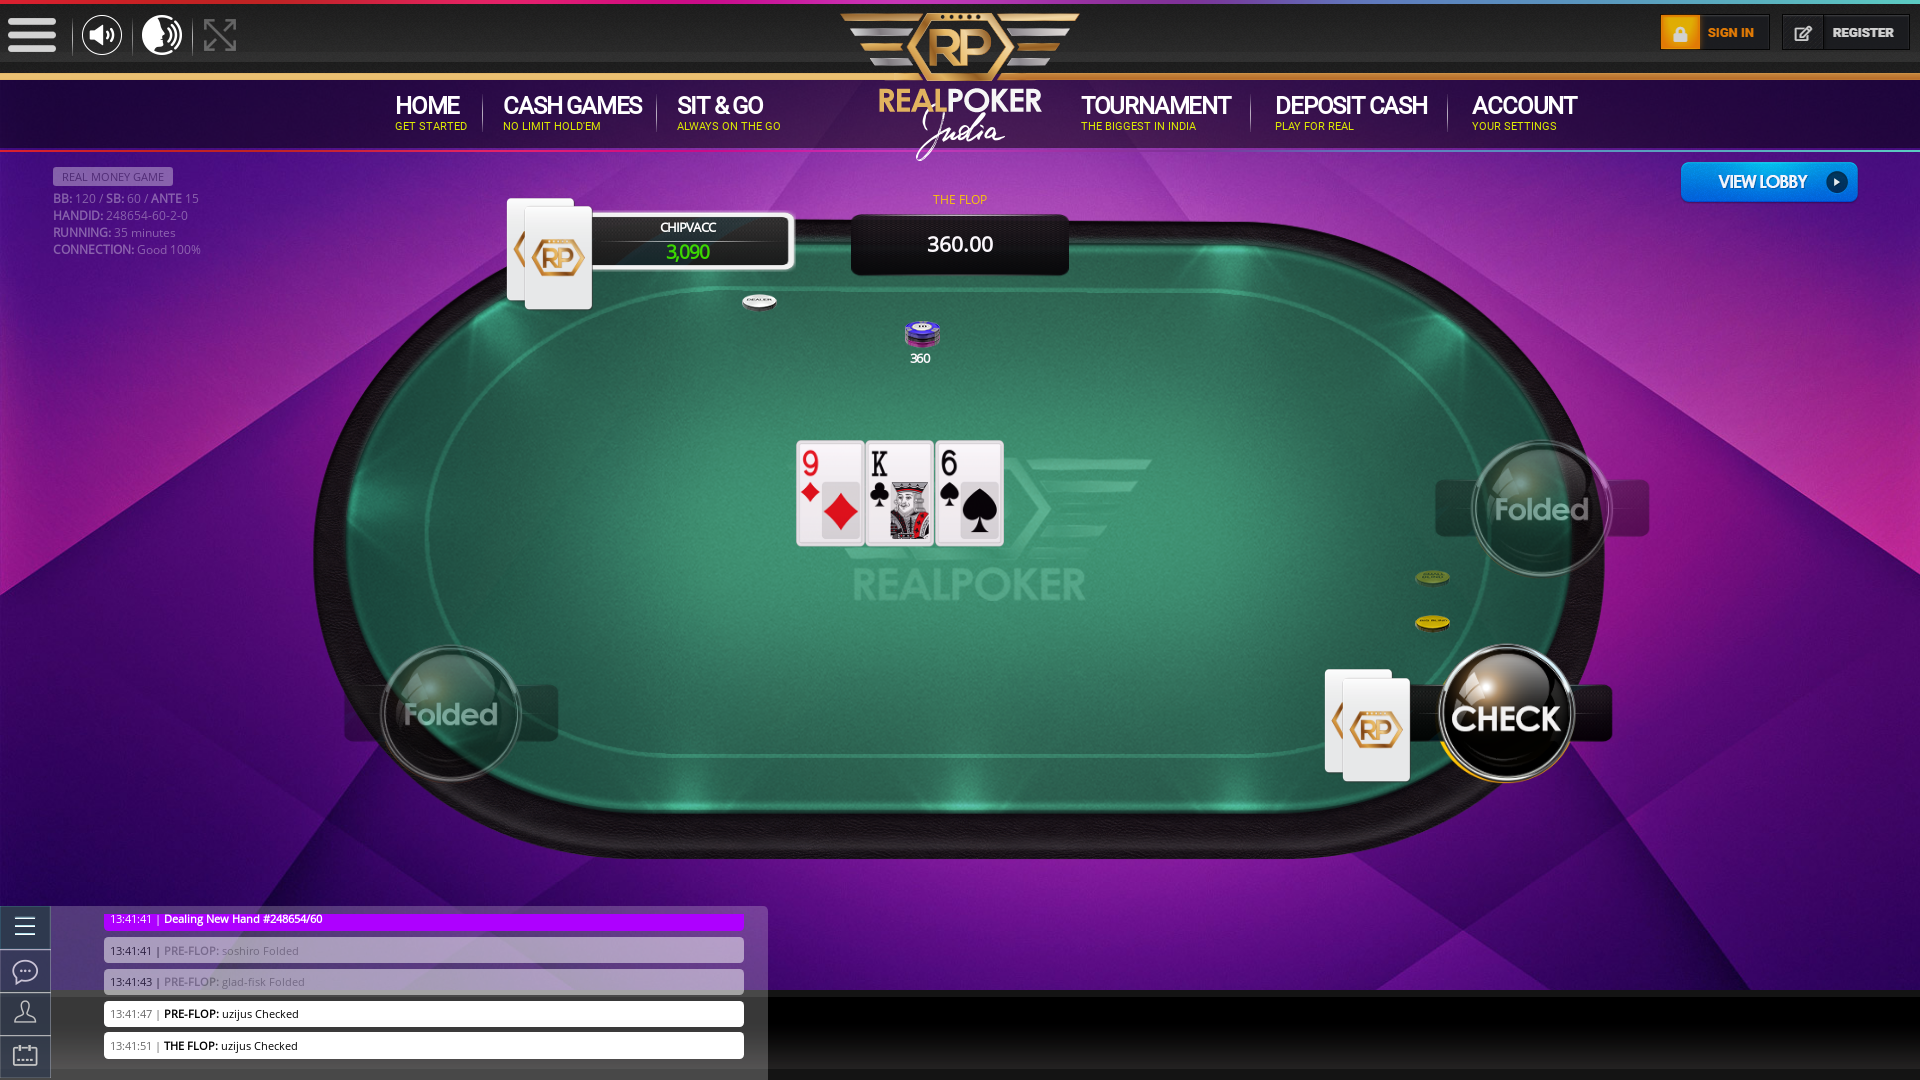 Real poker 10 player table in the 35th minute of the match